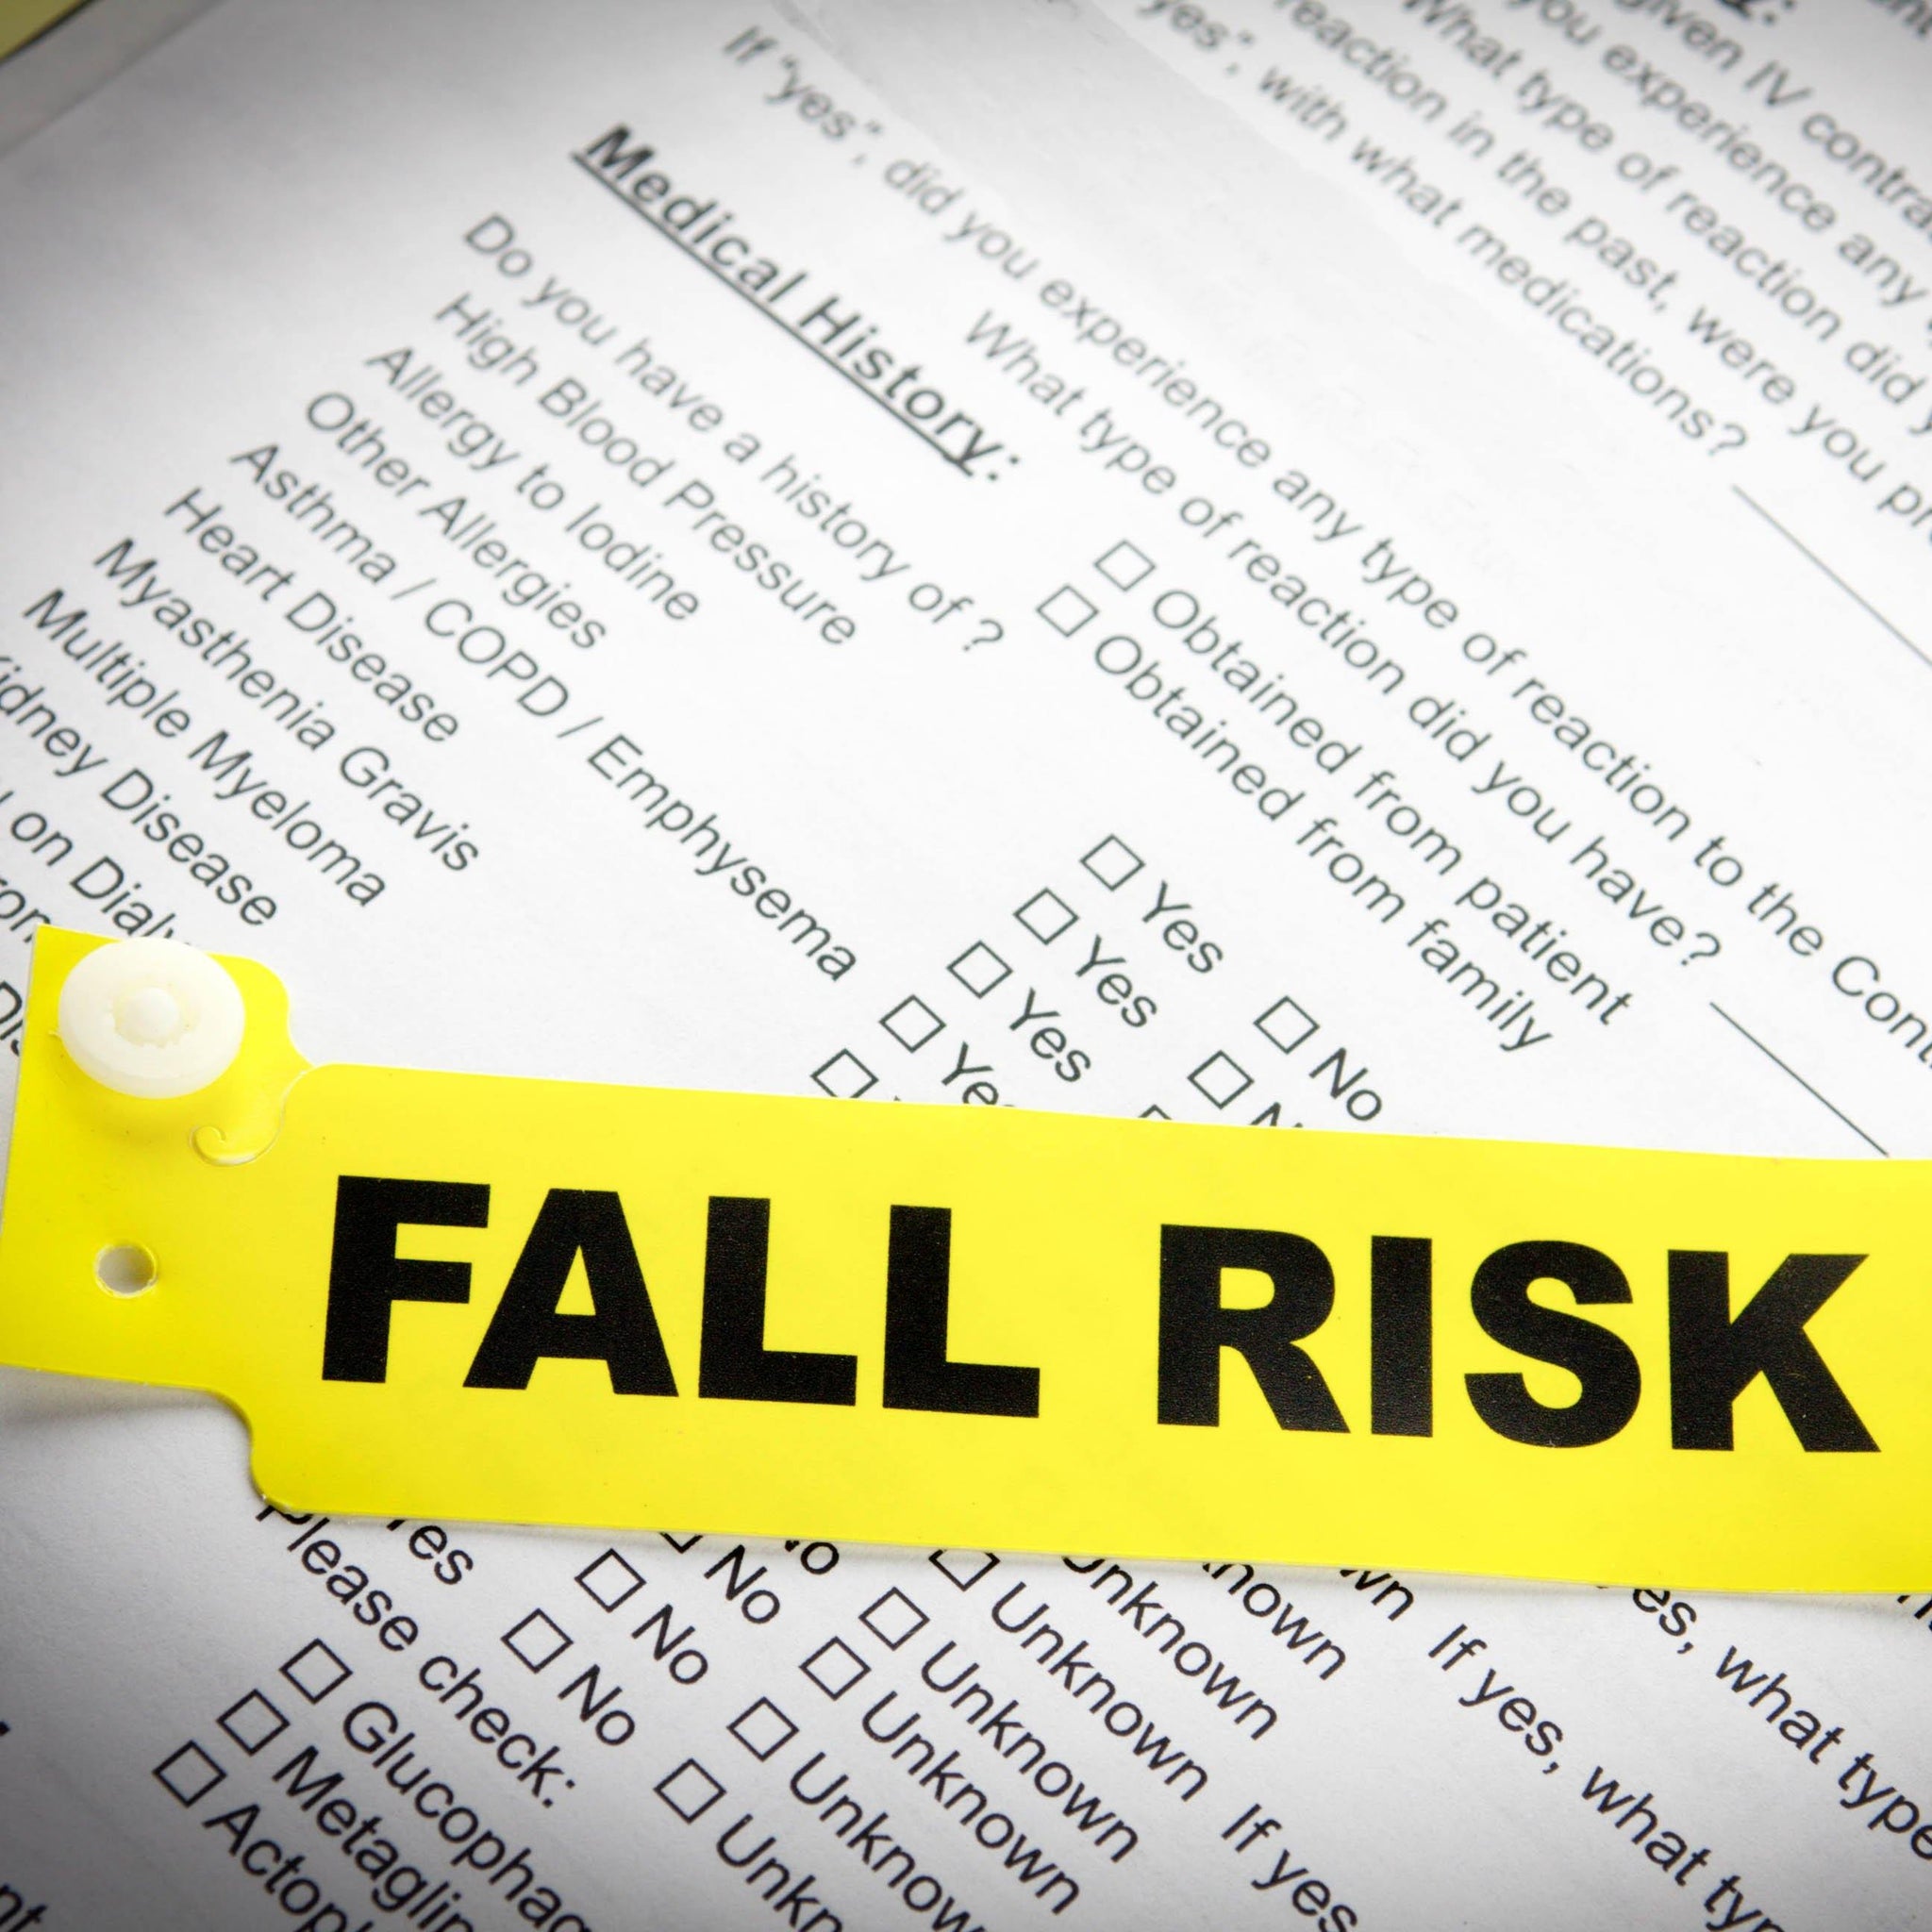 How to Reduce Fall Risk in the Elderly through Carotenoid Supplementation